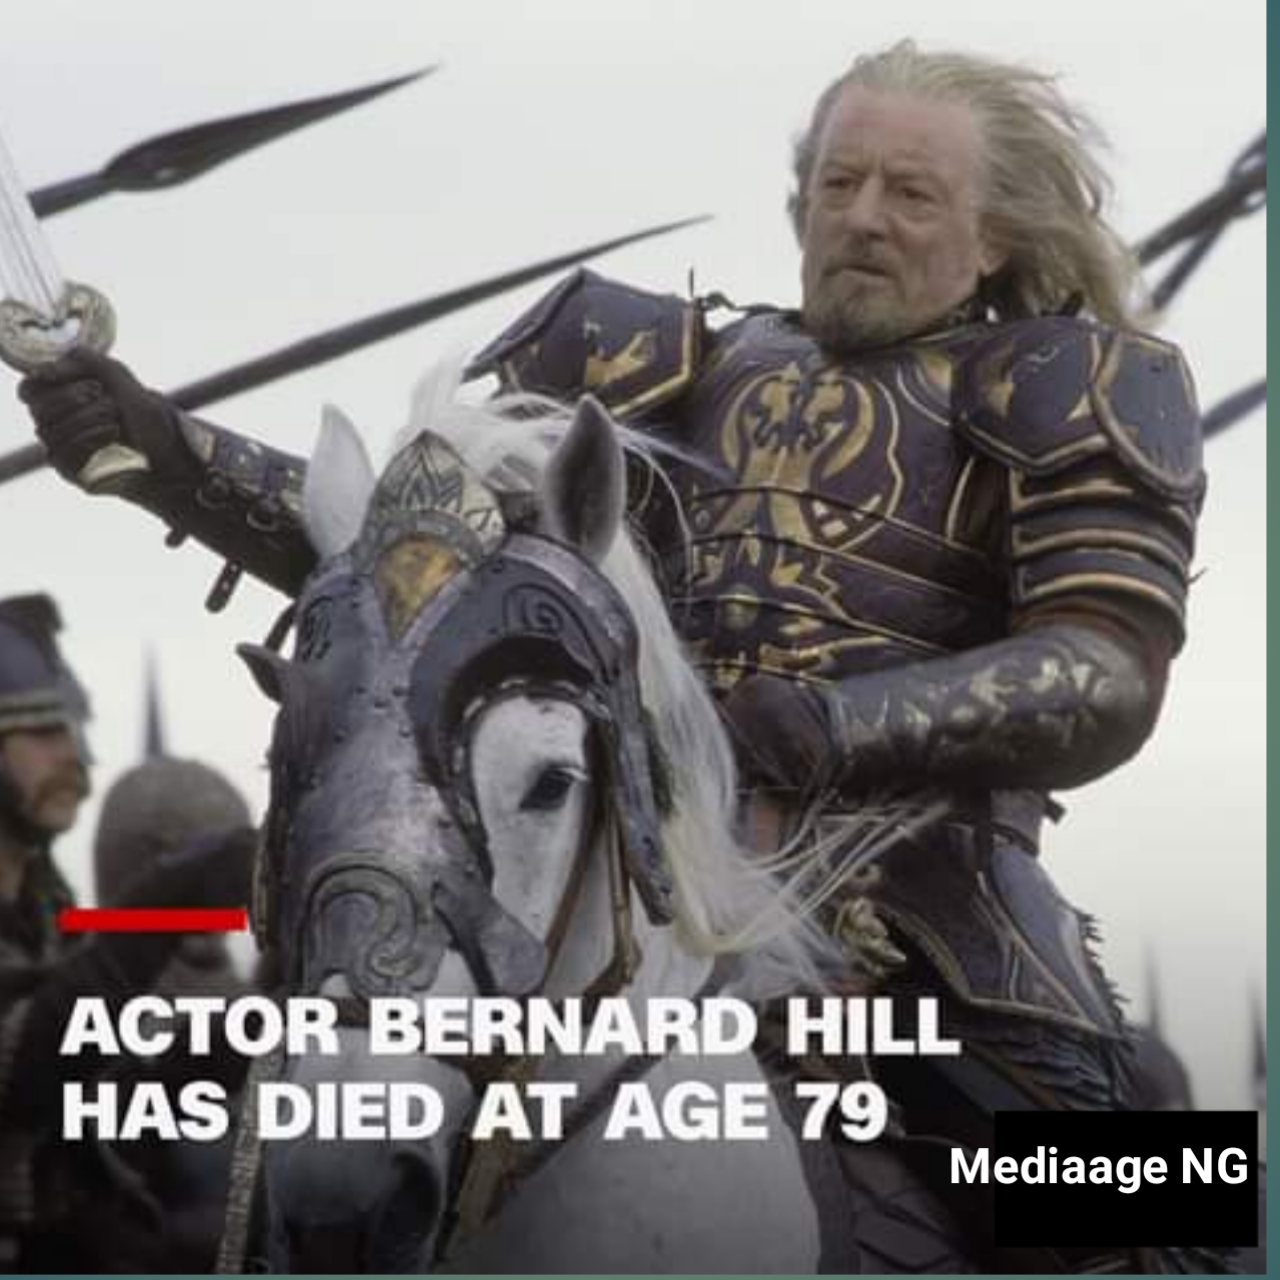 MediaageNG "Titanic" And "Lord of The Rings" Actor, Benard Hills Dies The family of British actor, Bernard Hill, yesterday announced his demise. The late Hill, best known for supporting roles in “Titanic” and “The Lord of the Rings” trilogy, died in the early hours of Sunday.